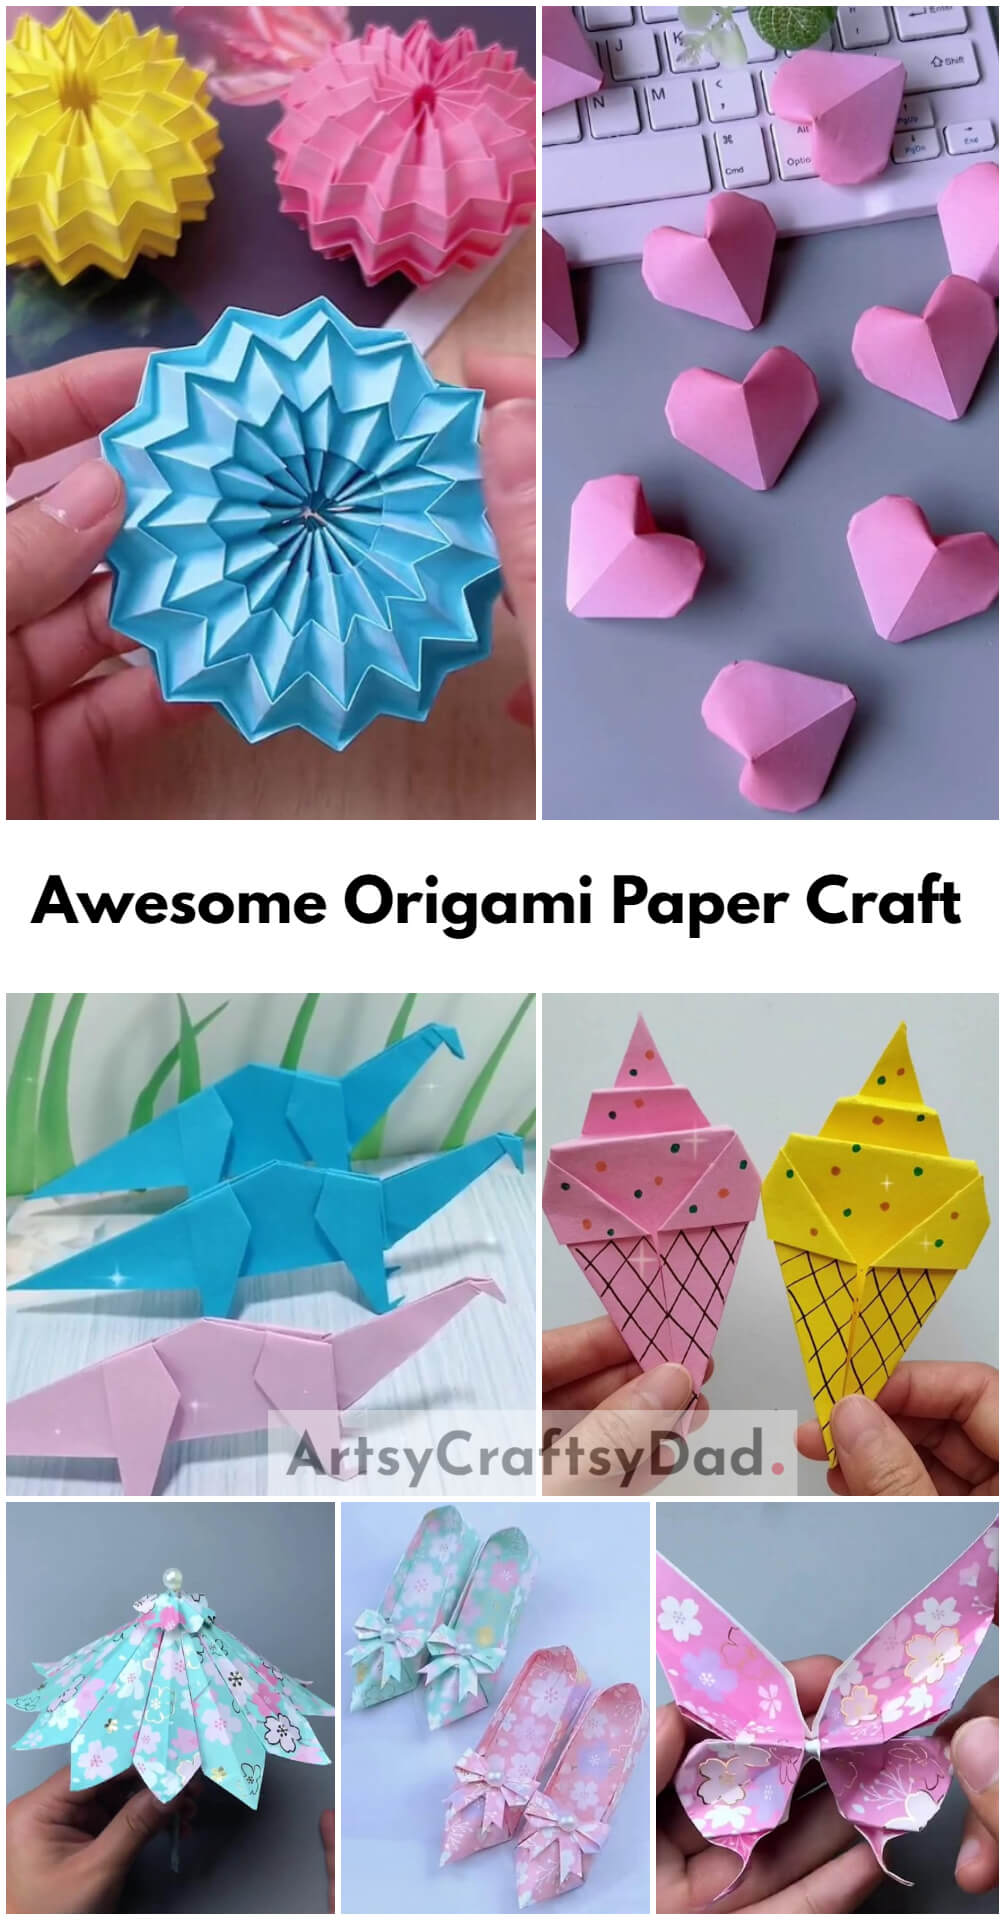 Awesome Origami Paper Craft Projects For Kids